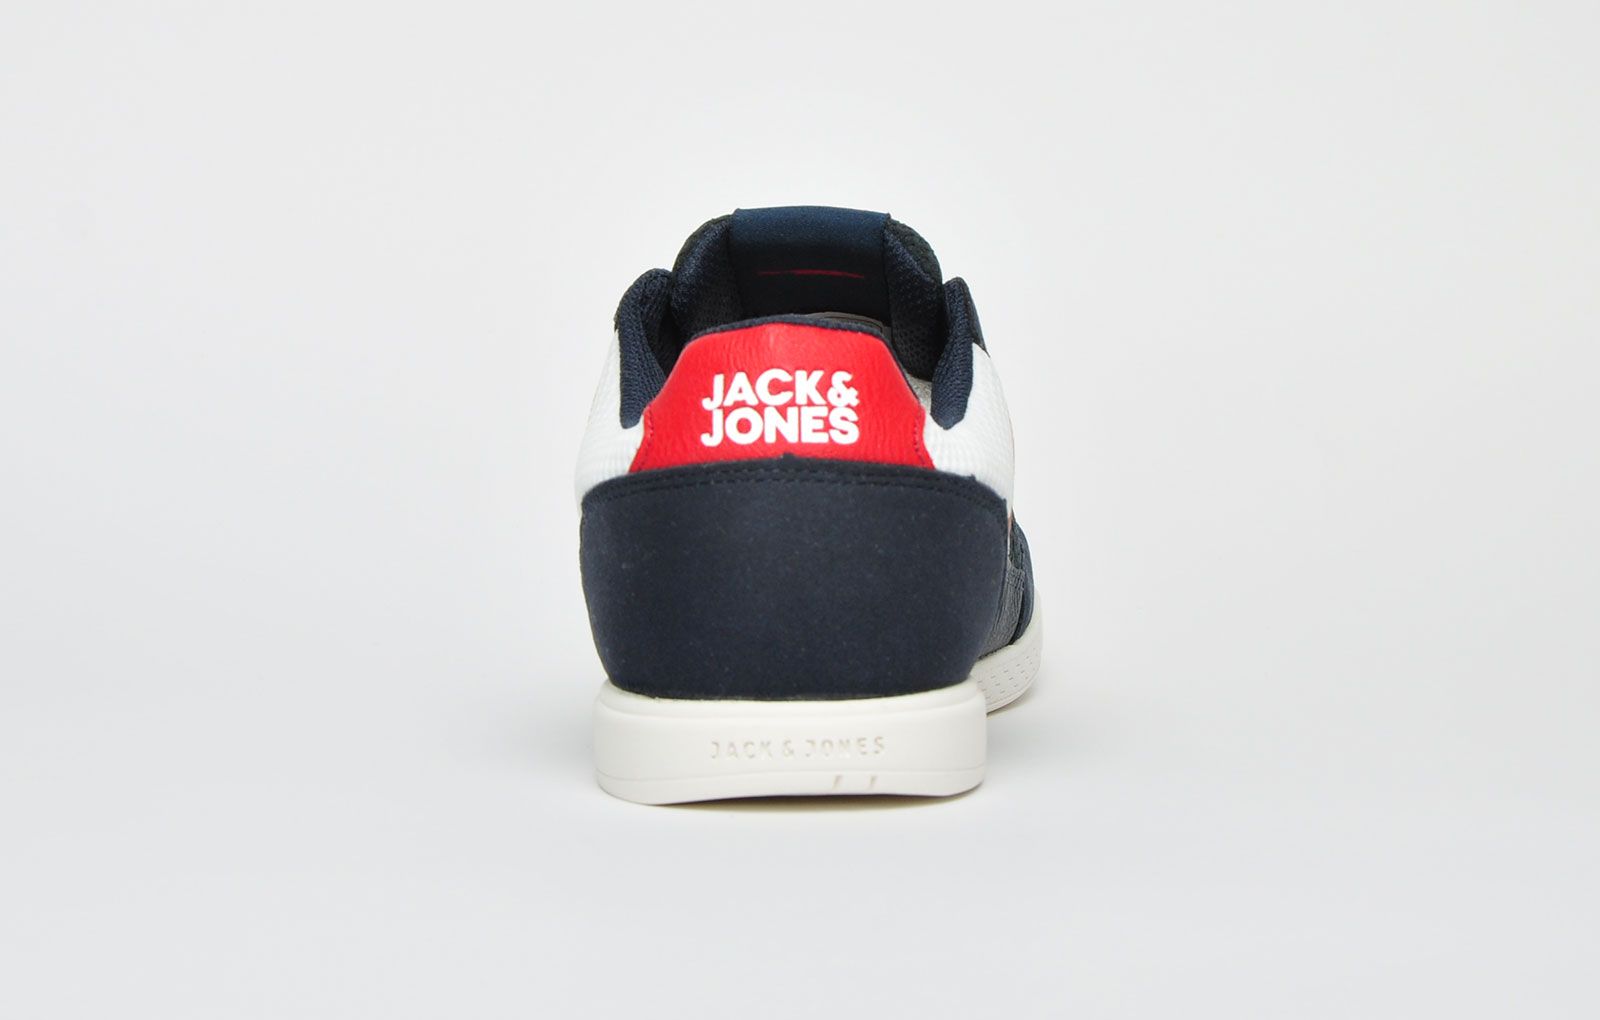 <p>Featuring a navy synthetic upper with designer stitch detailing throughout, complete with Jack & Jones branding for true brand appeal. These men’s trainers from Jack & Jones can be matched up with your favourite outfit, featuring a durable rubber outsole and a full lace up fastening for a secure lockdown fit with the iconic Jack & Jones branding to the side for a 5-star premium designer finish. Add an eye-catching trainer to your collection now. <br></p> <p class=